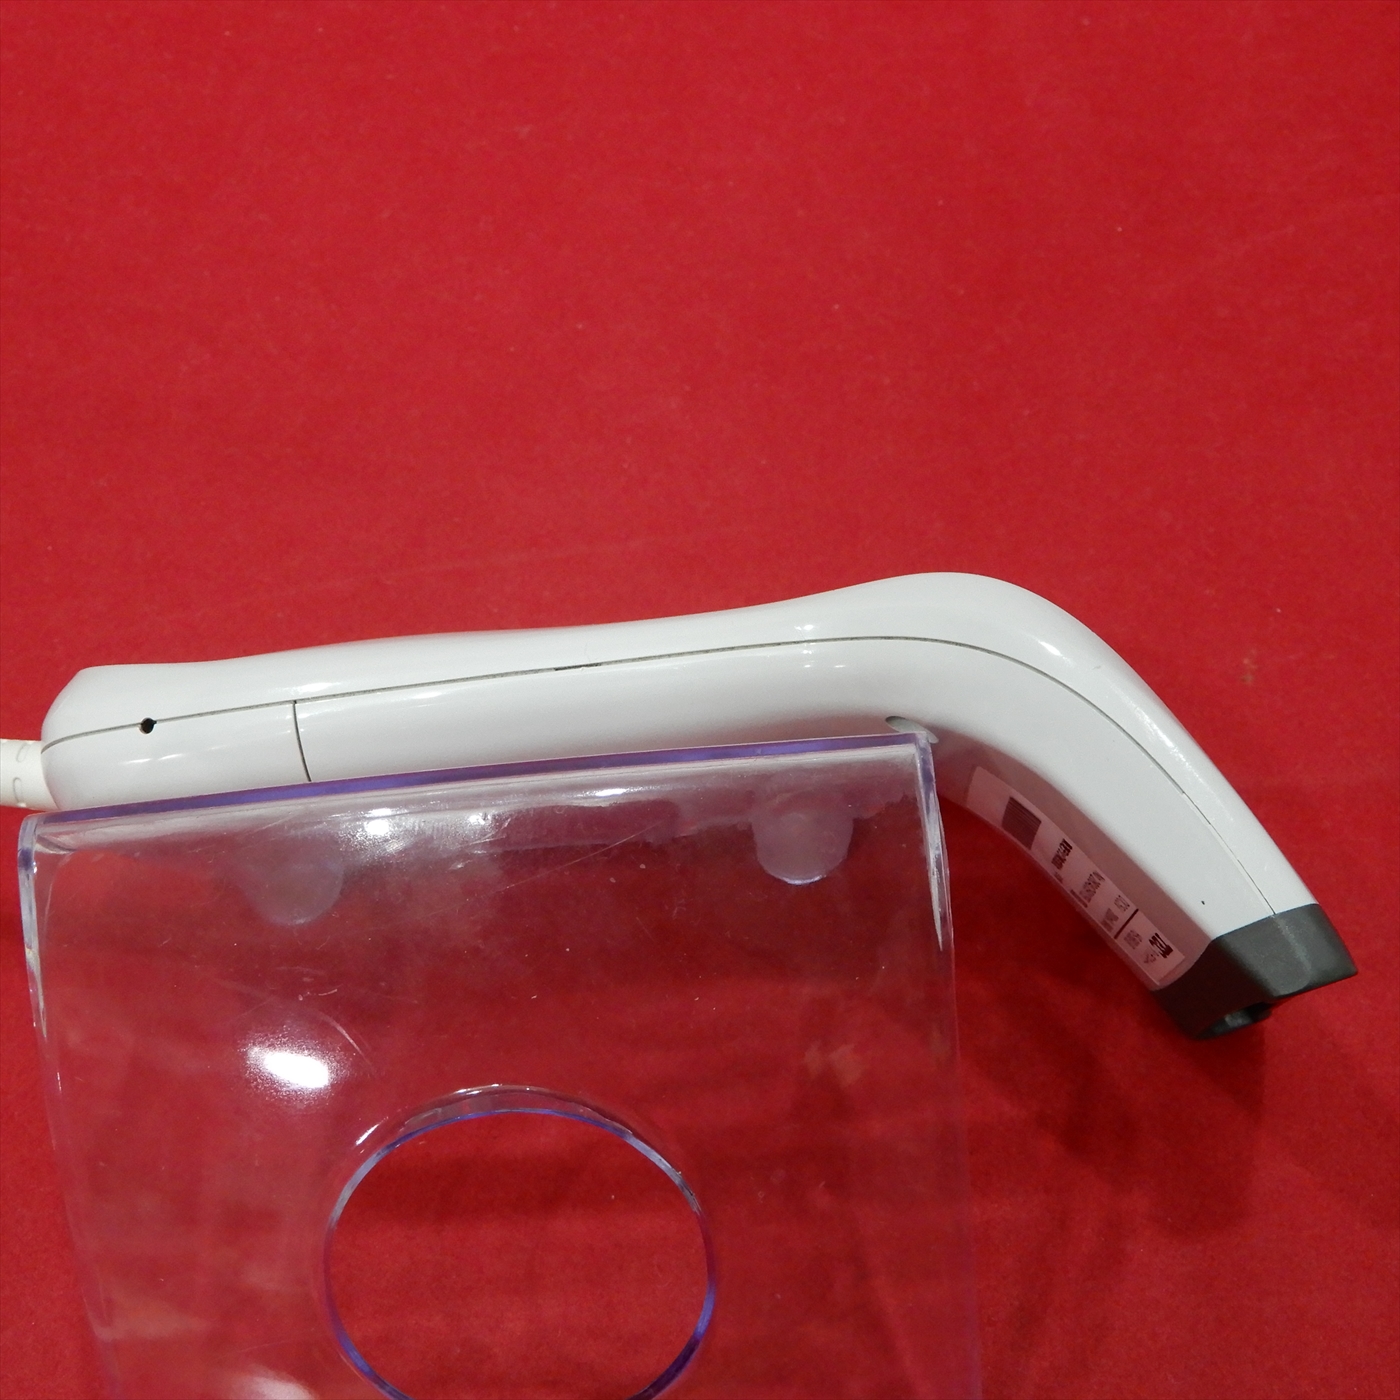 TEC HS-560-UB barcode hand scanner USB connection NO.231128008